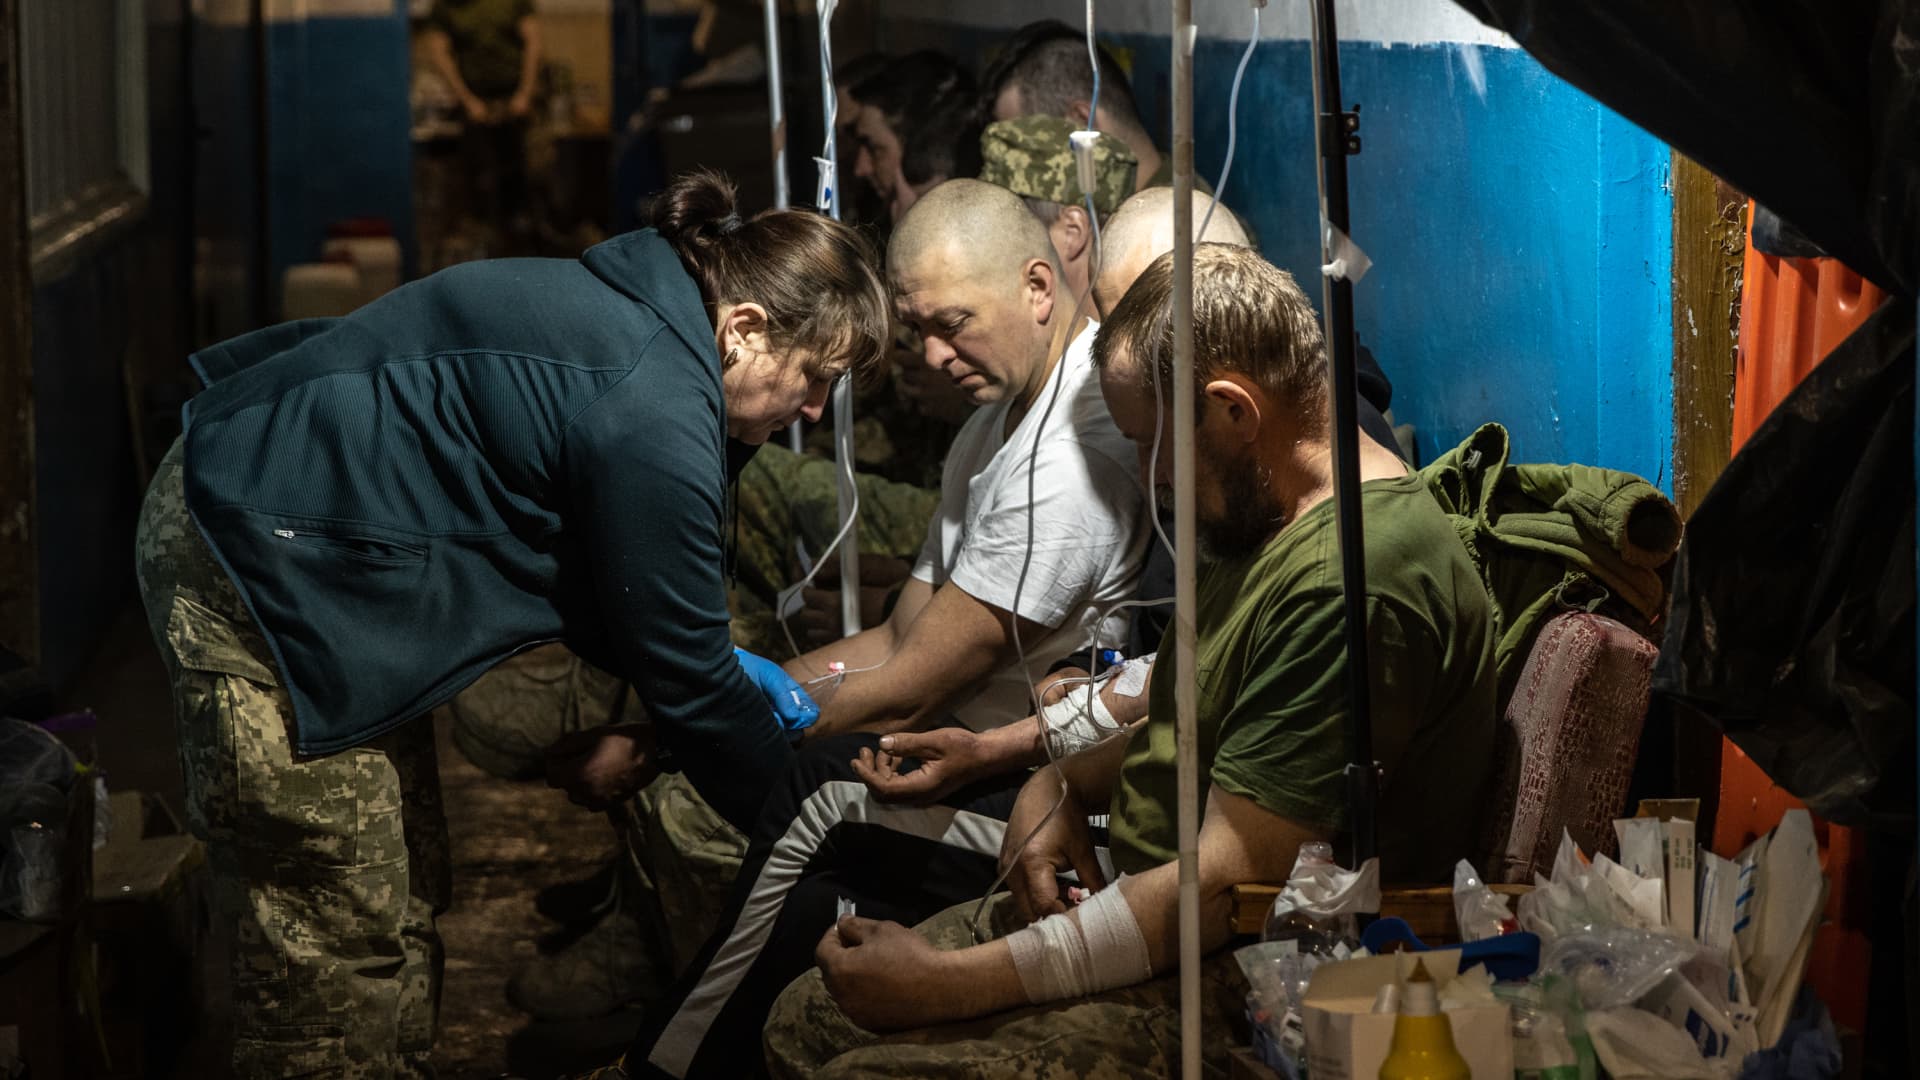 Members of the Ukrainian military receive treatment for concussions and light injuries from Ukrainian military medics at a frontline field hospital on May 10, 2022 in Popasna, Ukraine.